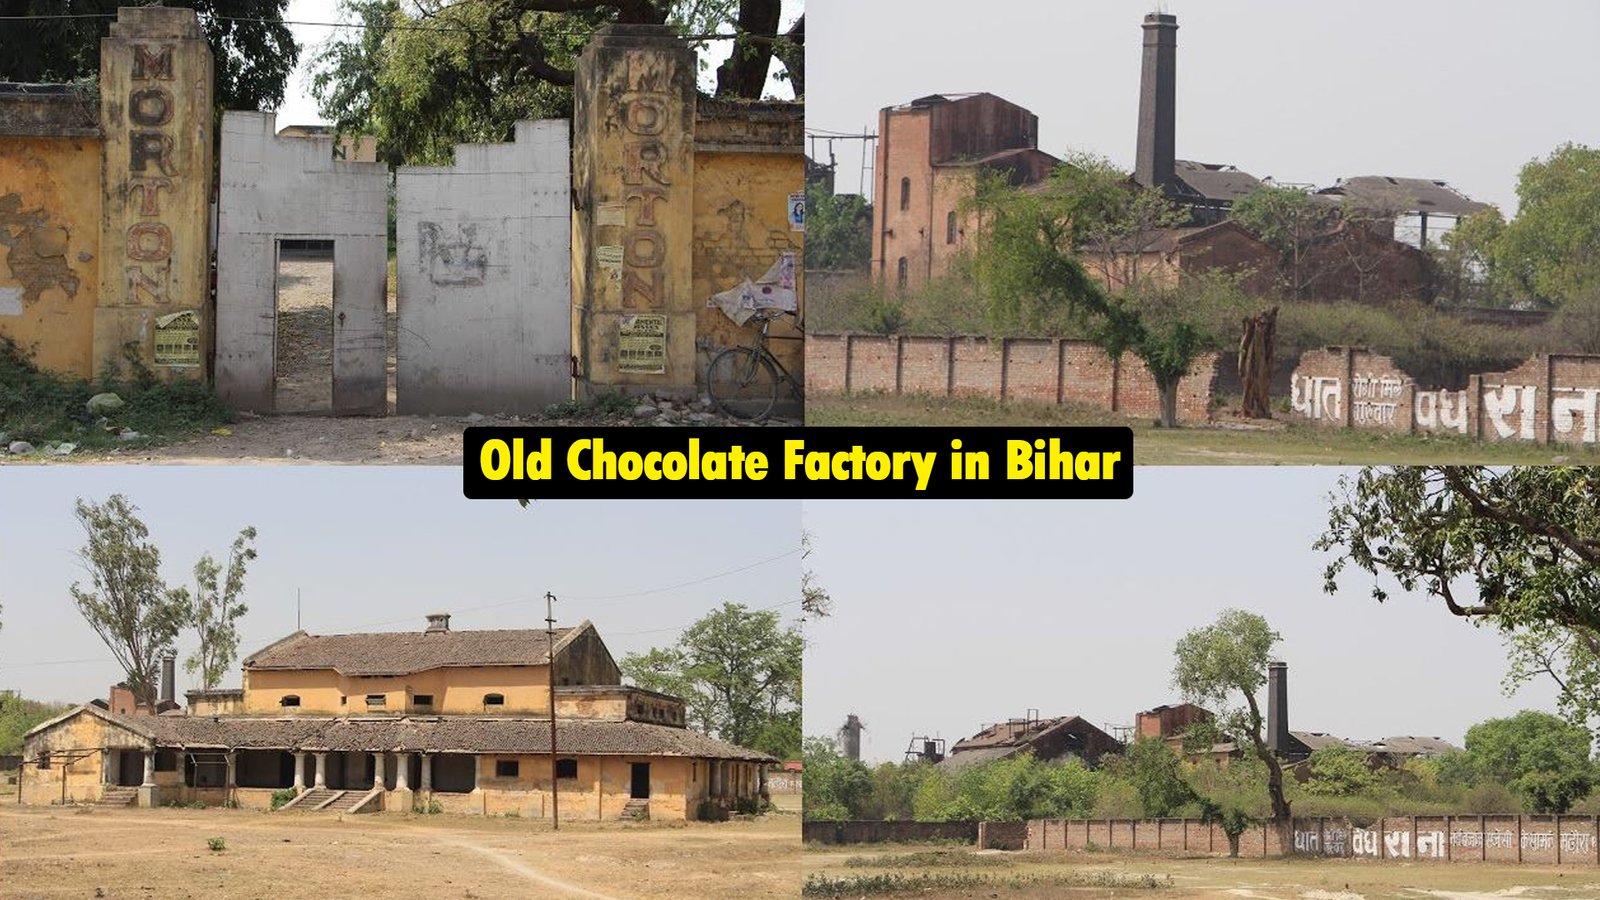 Why there is no big company in Bihar